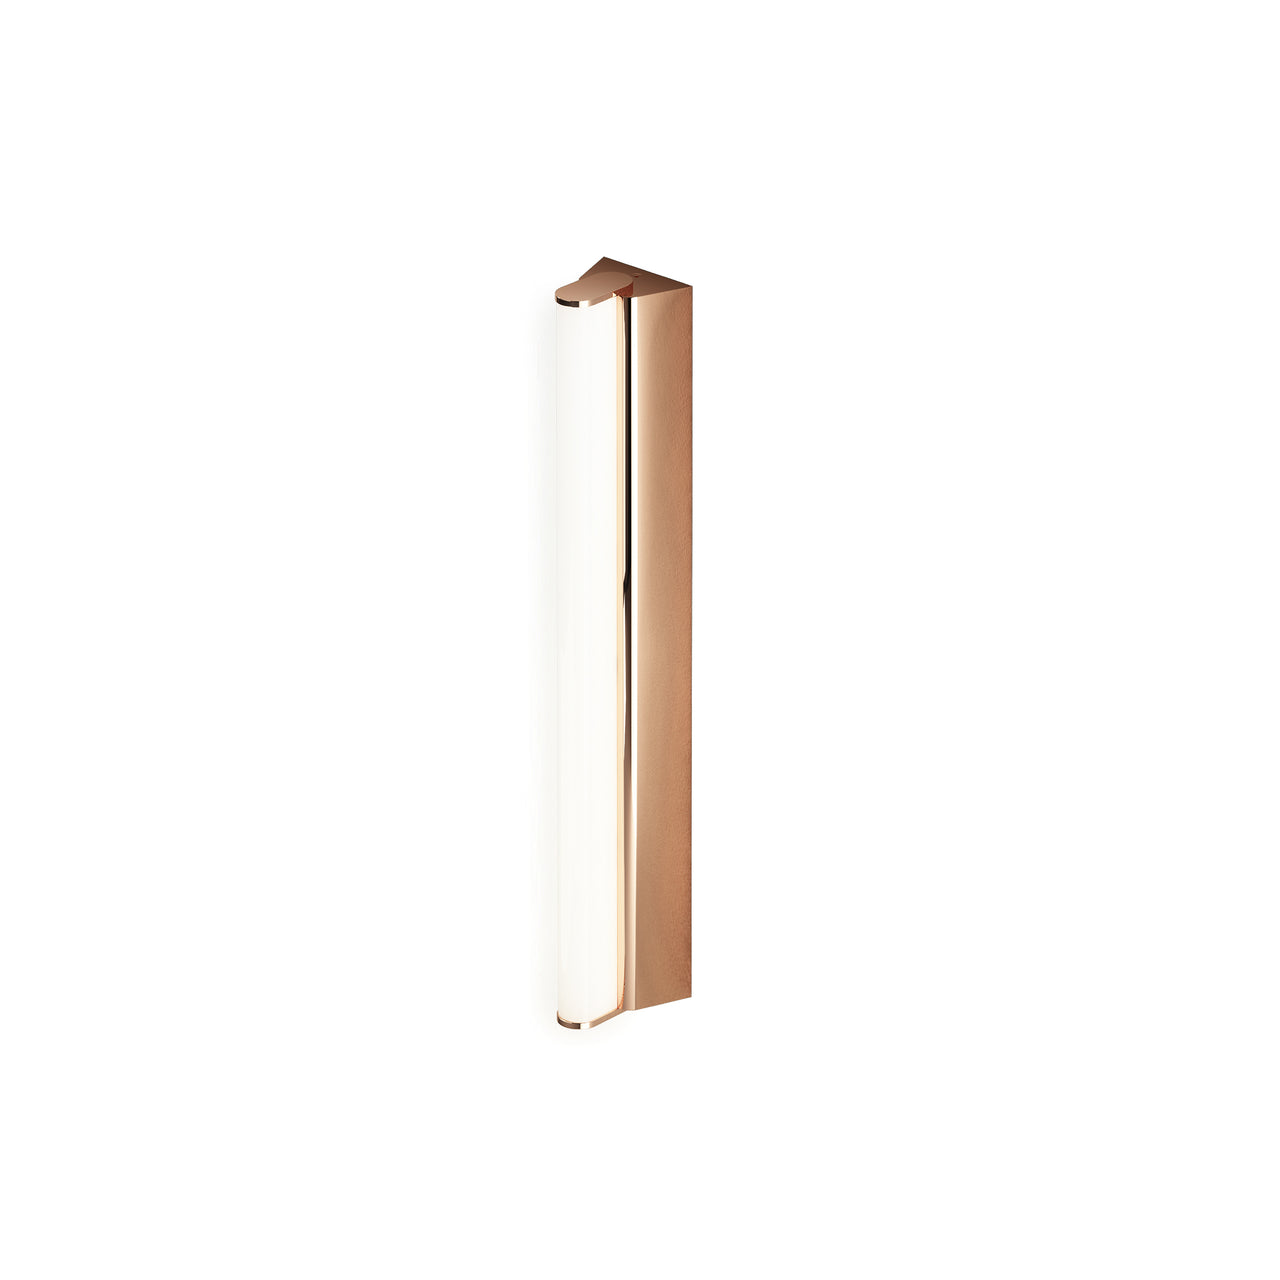 IP Metrop Wall Light: Small + Polished Copper